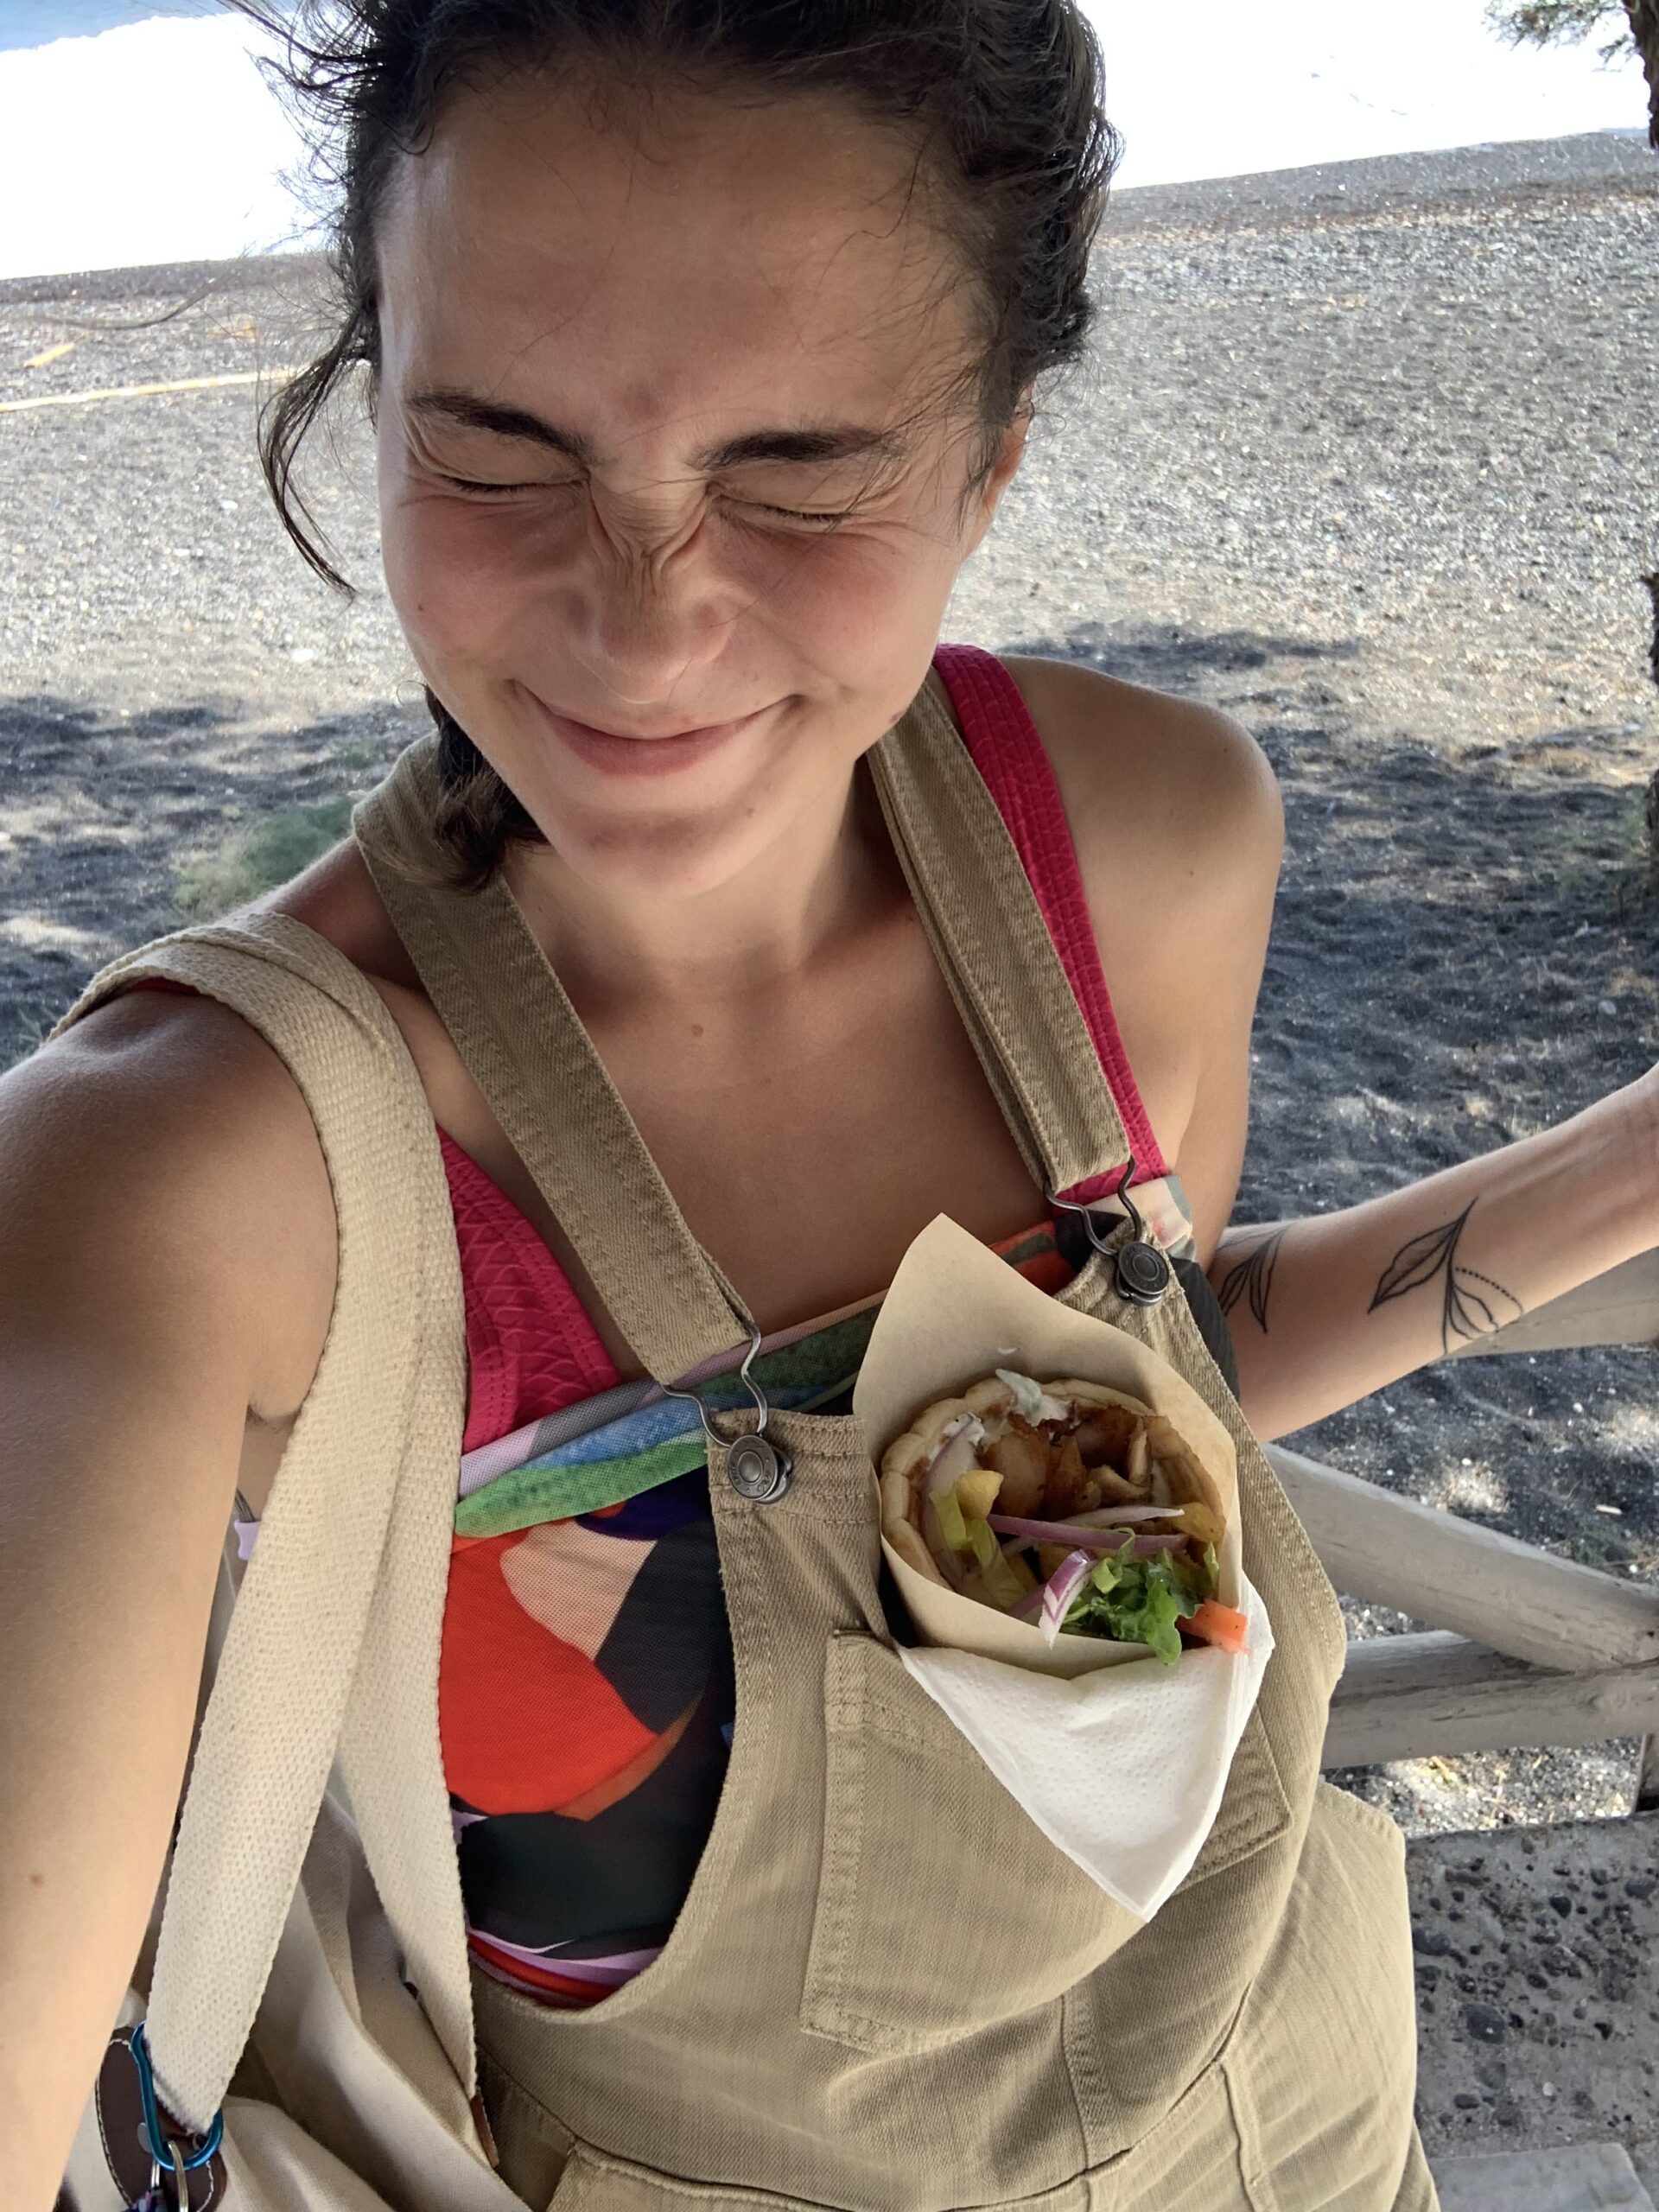 Alexa smiles with a gyro in the pocket of her overalls on the beach in Santorini, Greece